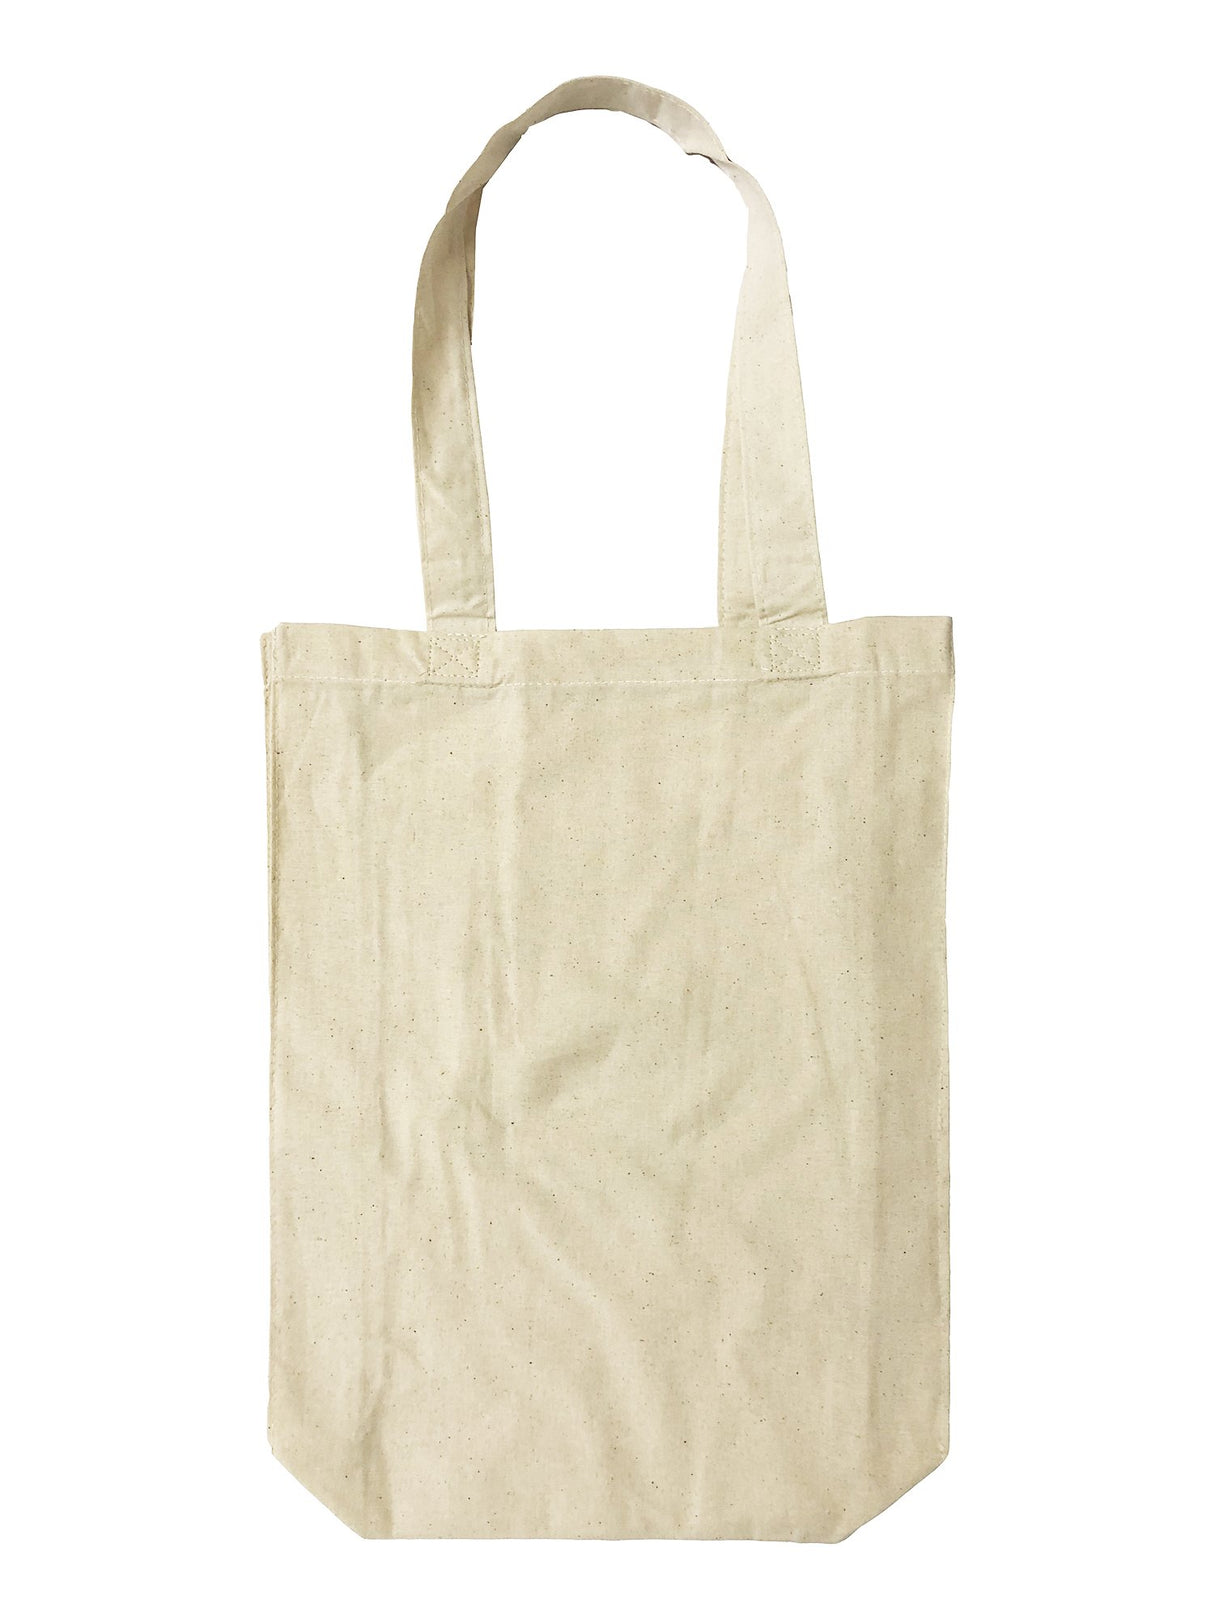 Organic Book Bag / 10" Small Tote Bag with Full Gusset - TF115